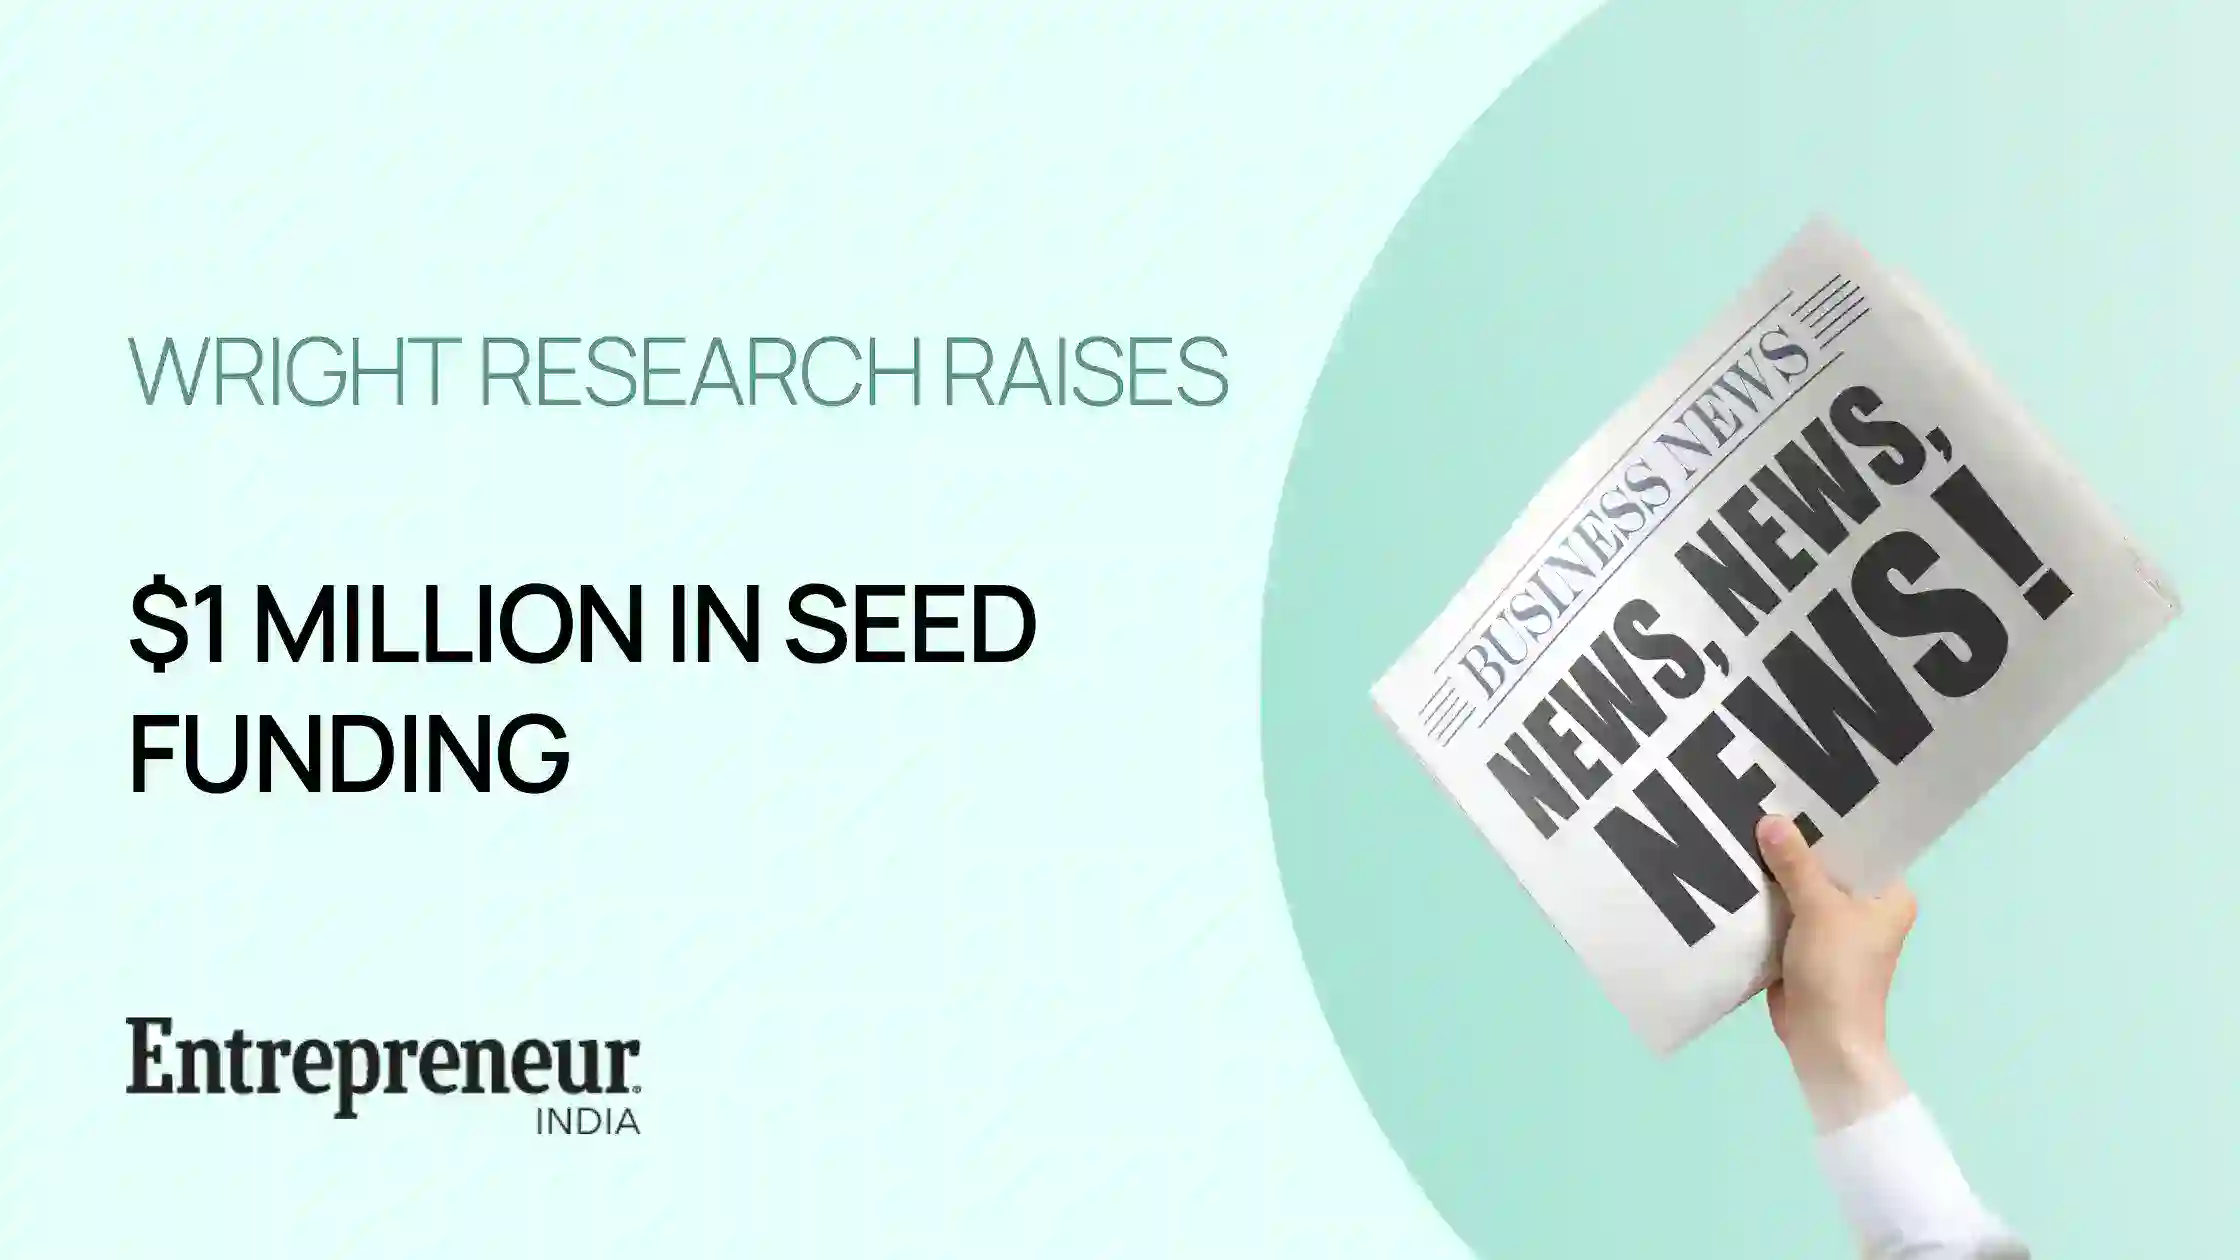 Wright Research Raises $1 Million In Seed Funding